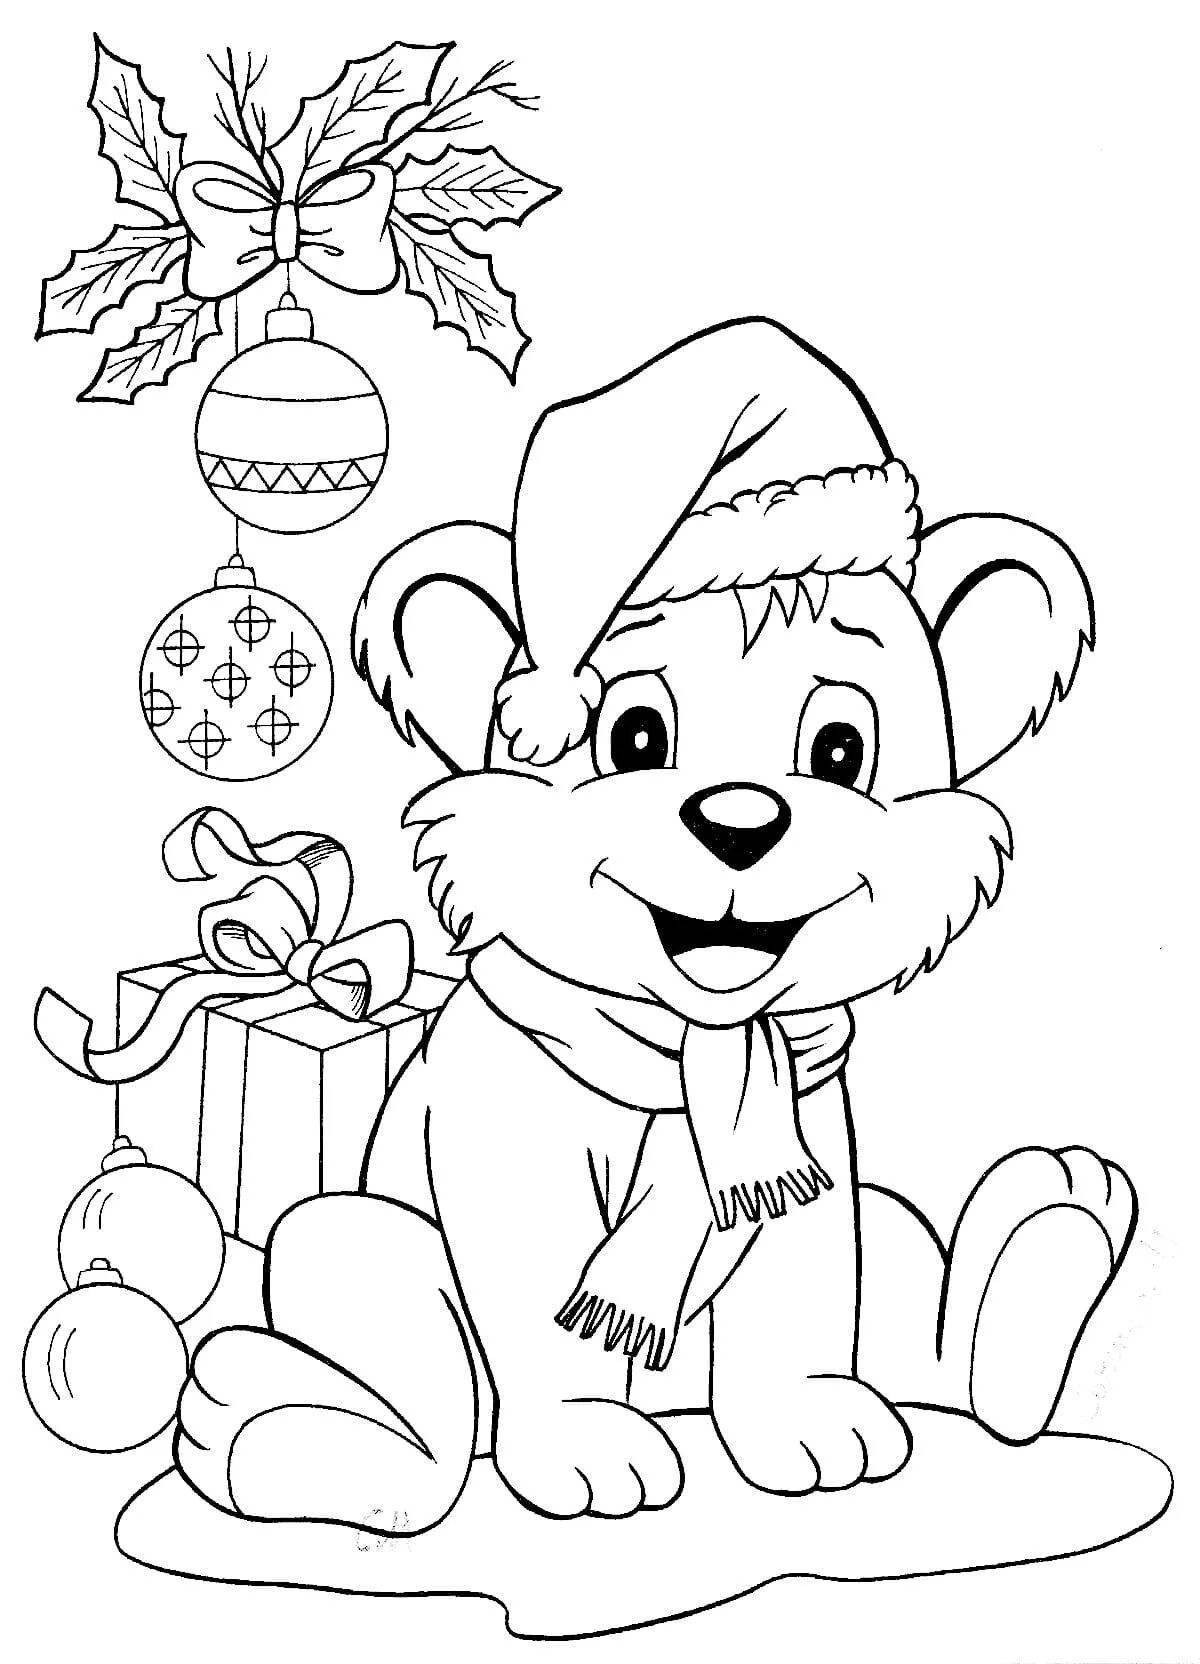 Bright tasteville Christmas coloring pages